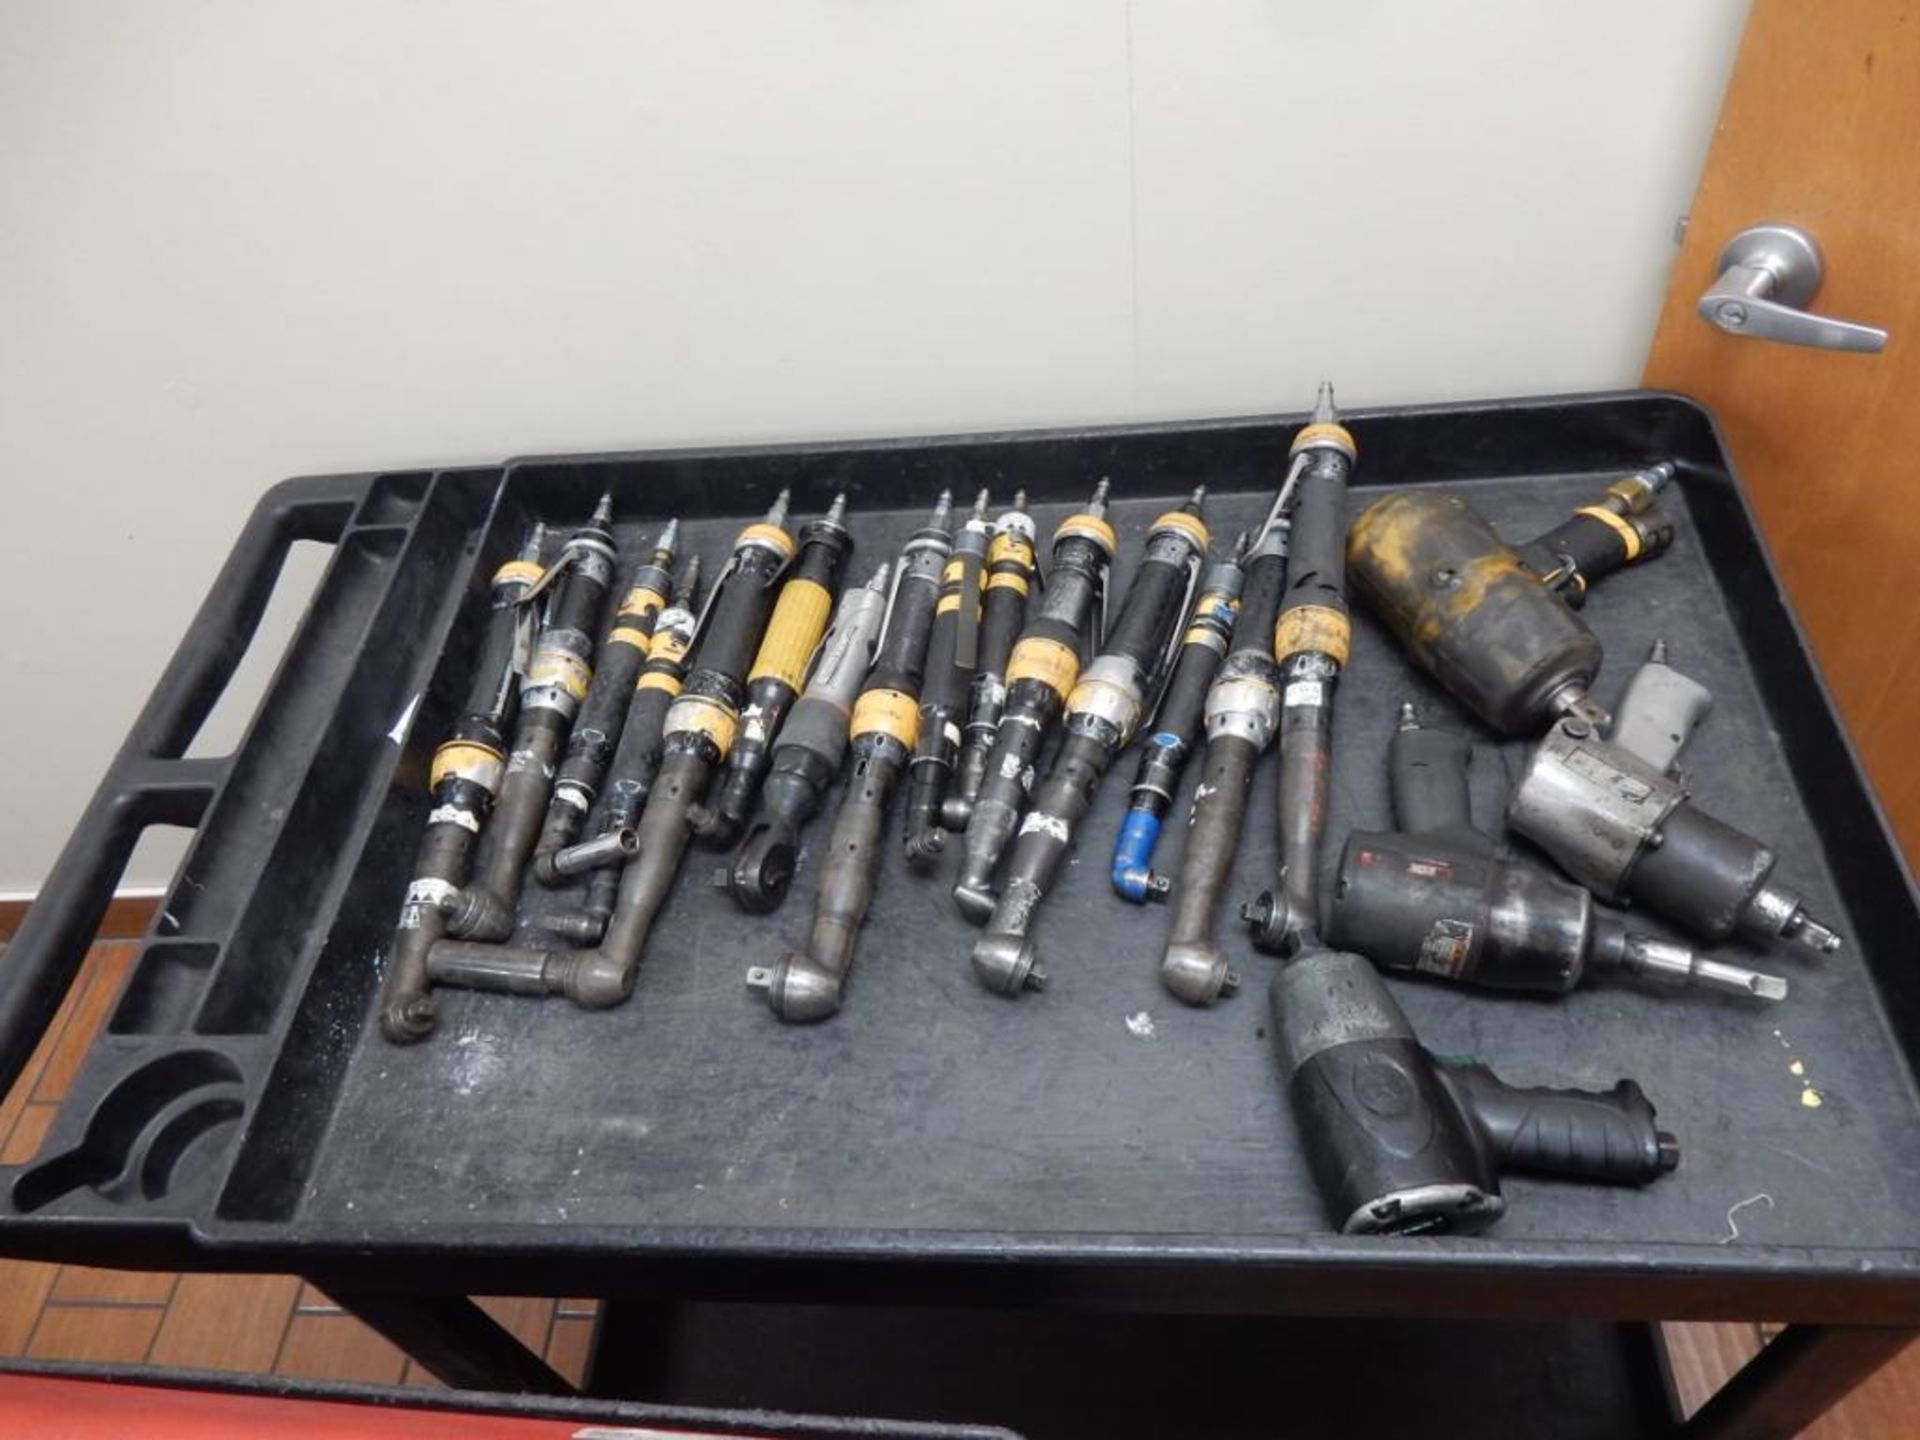 LOT (3) CARTS & CONTENTS - MISC. HAND TOOLS, TORQUE WRENCHES, GRINDERS, IMPACT DRIVERS, AIR RATCHETS - Image 2 of 4